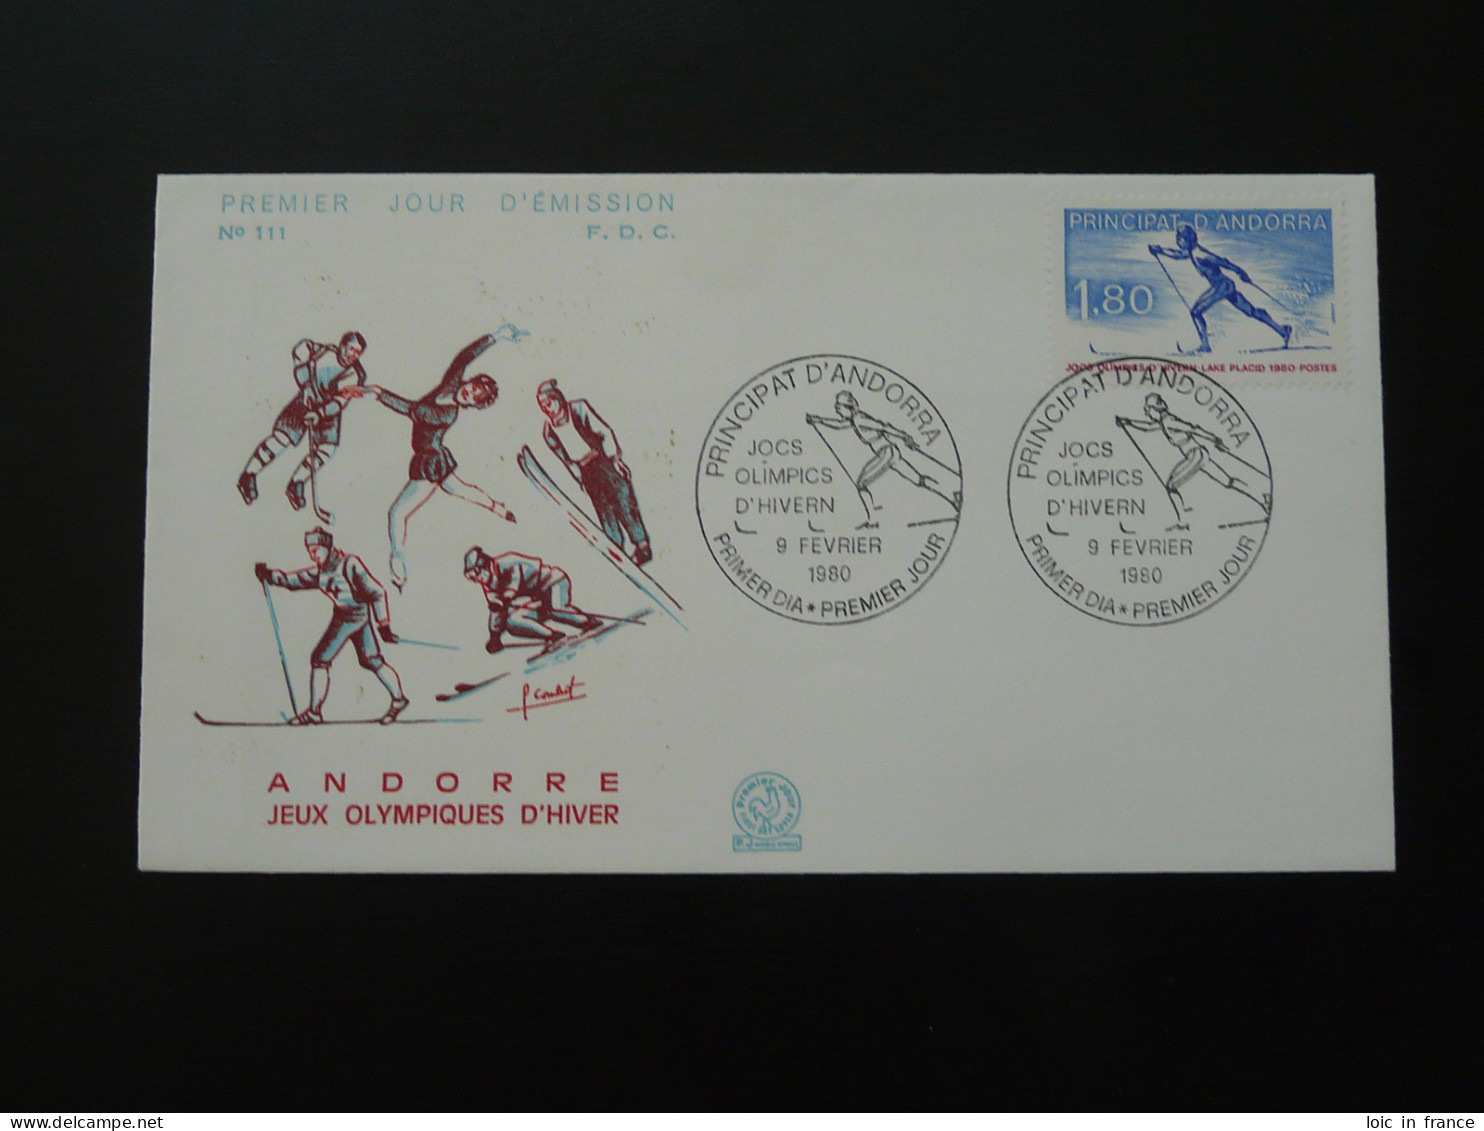 FDC Jeux Olympiques Lake Placid Olympic Games Andorre 1980 - Winter 1980: Lake Placid